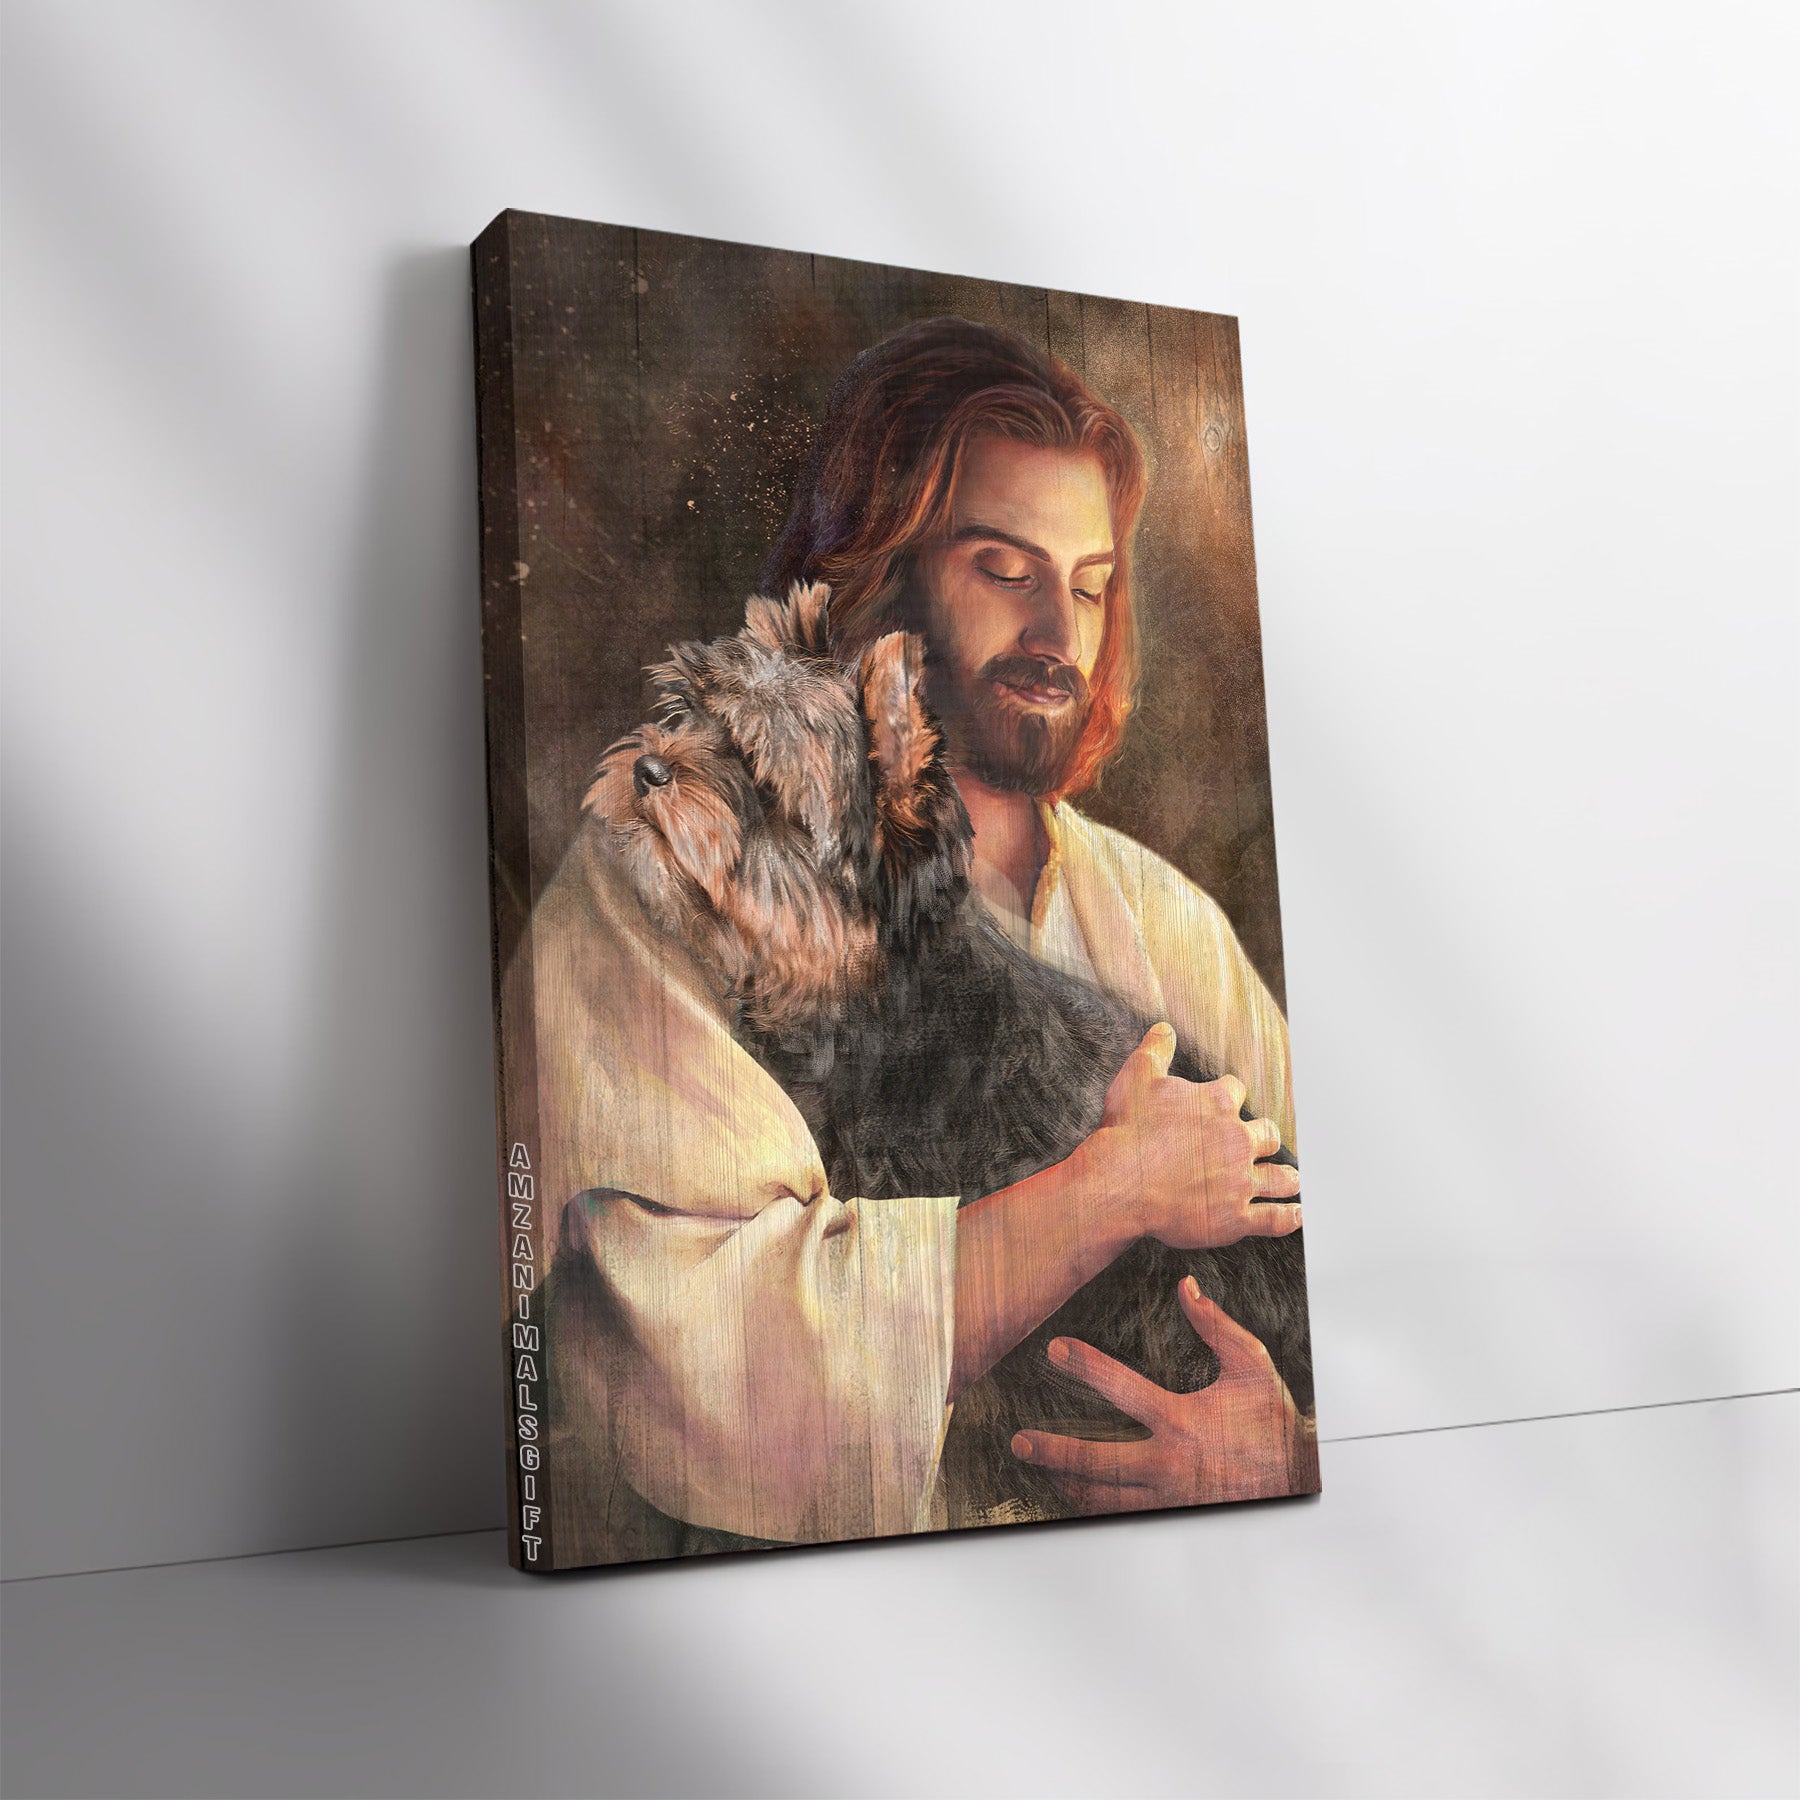 Yorkshire Terrier Dog Portrait Canvas - Yorkshire Terrier, In His Arms, Jesus Painting Canvas - Gift For Yorkshire Terrier, Dog Lovers